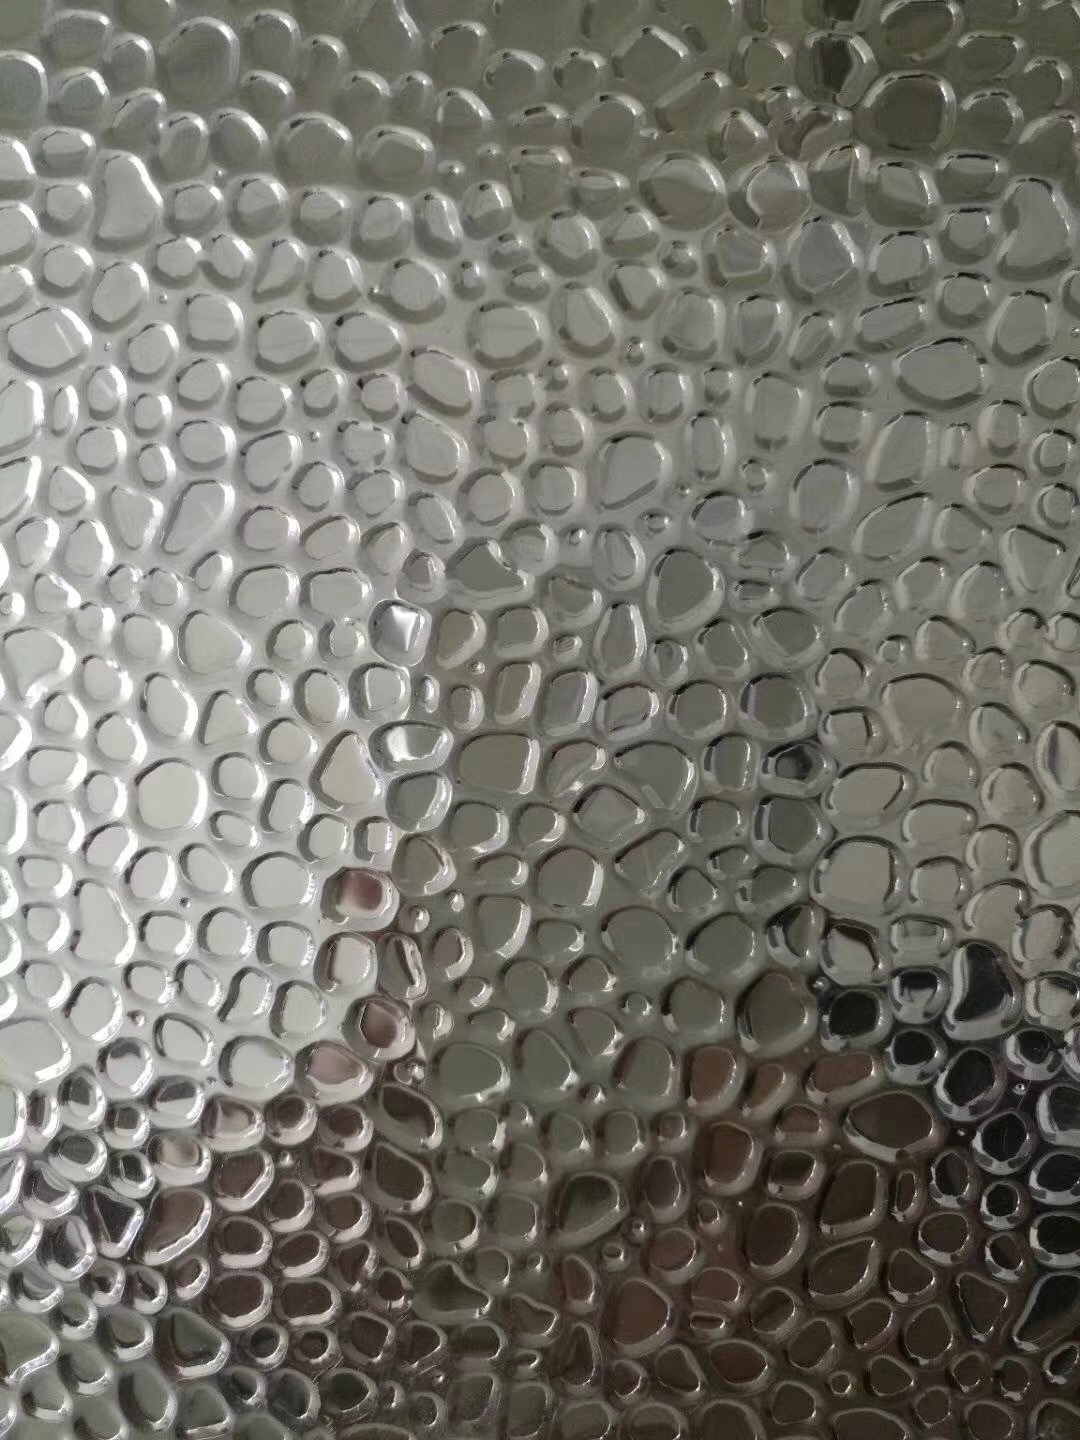 Patterned Aluminum Plate